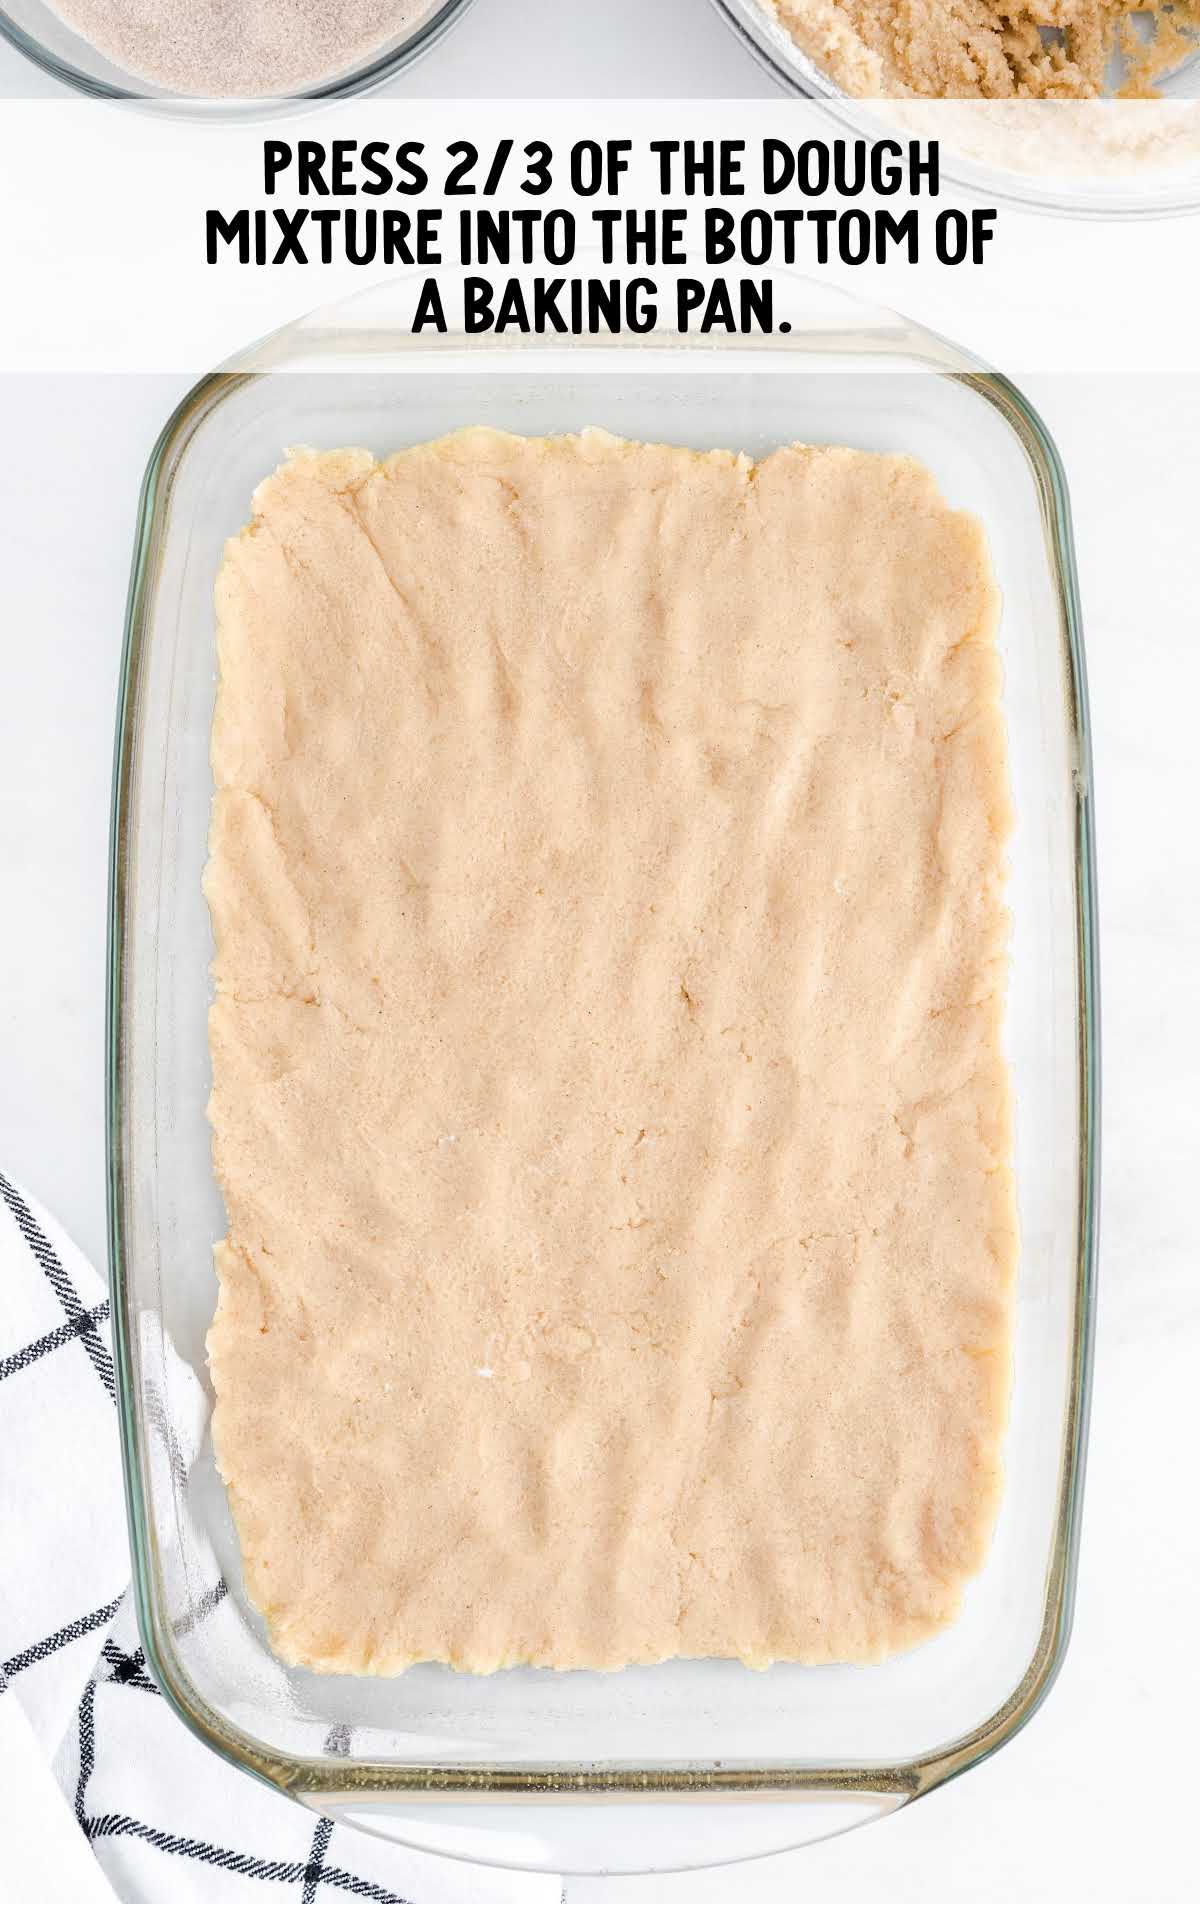 dough mixture placed in a baking dish